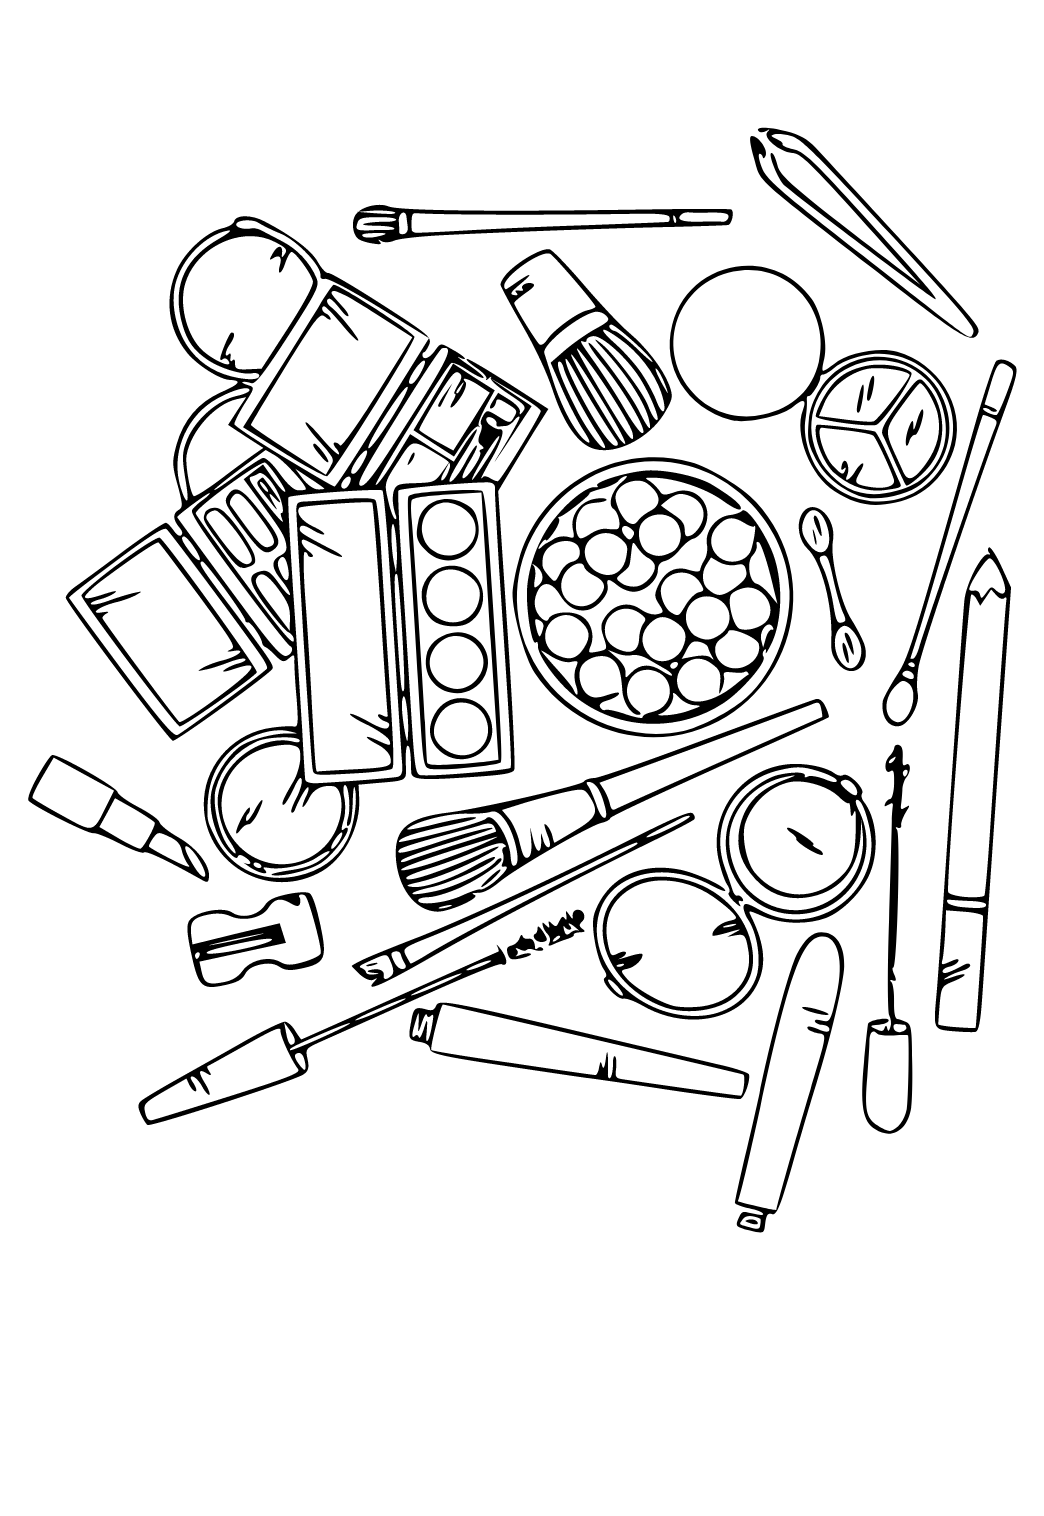 Free printable makeup kit coloring page for adults and kids